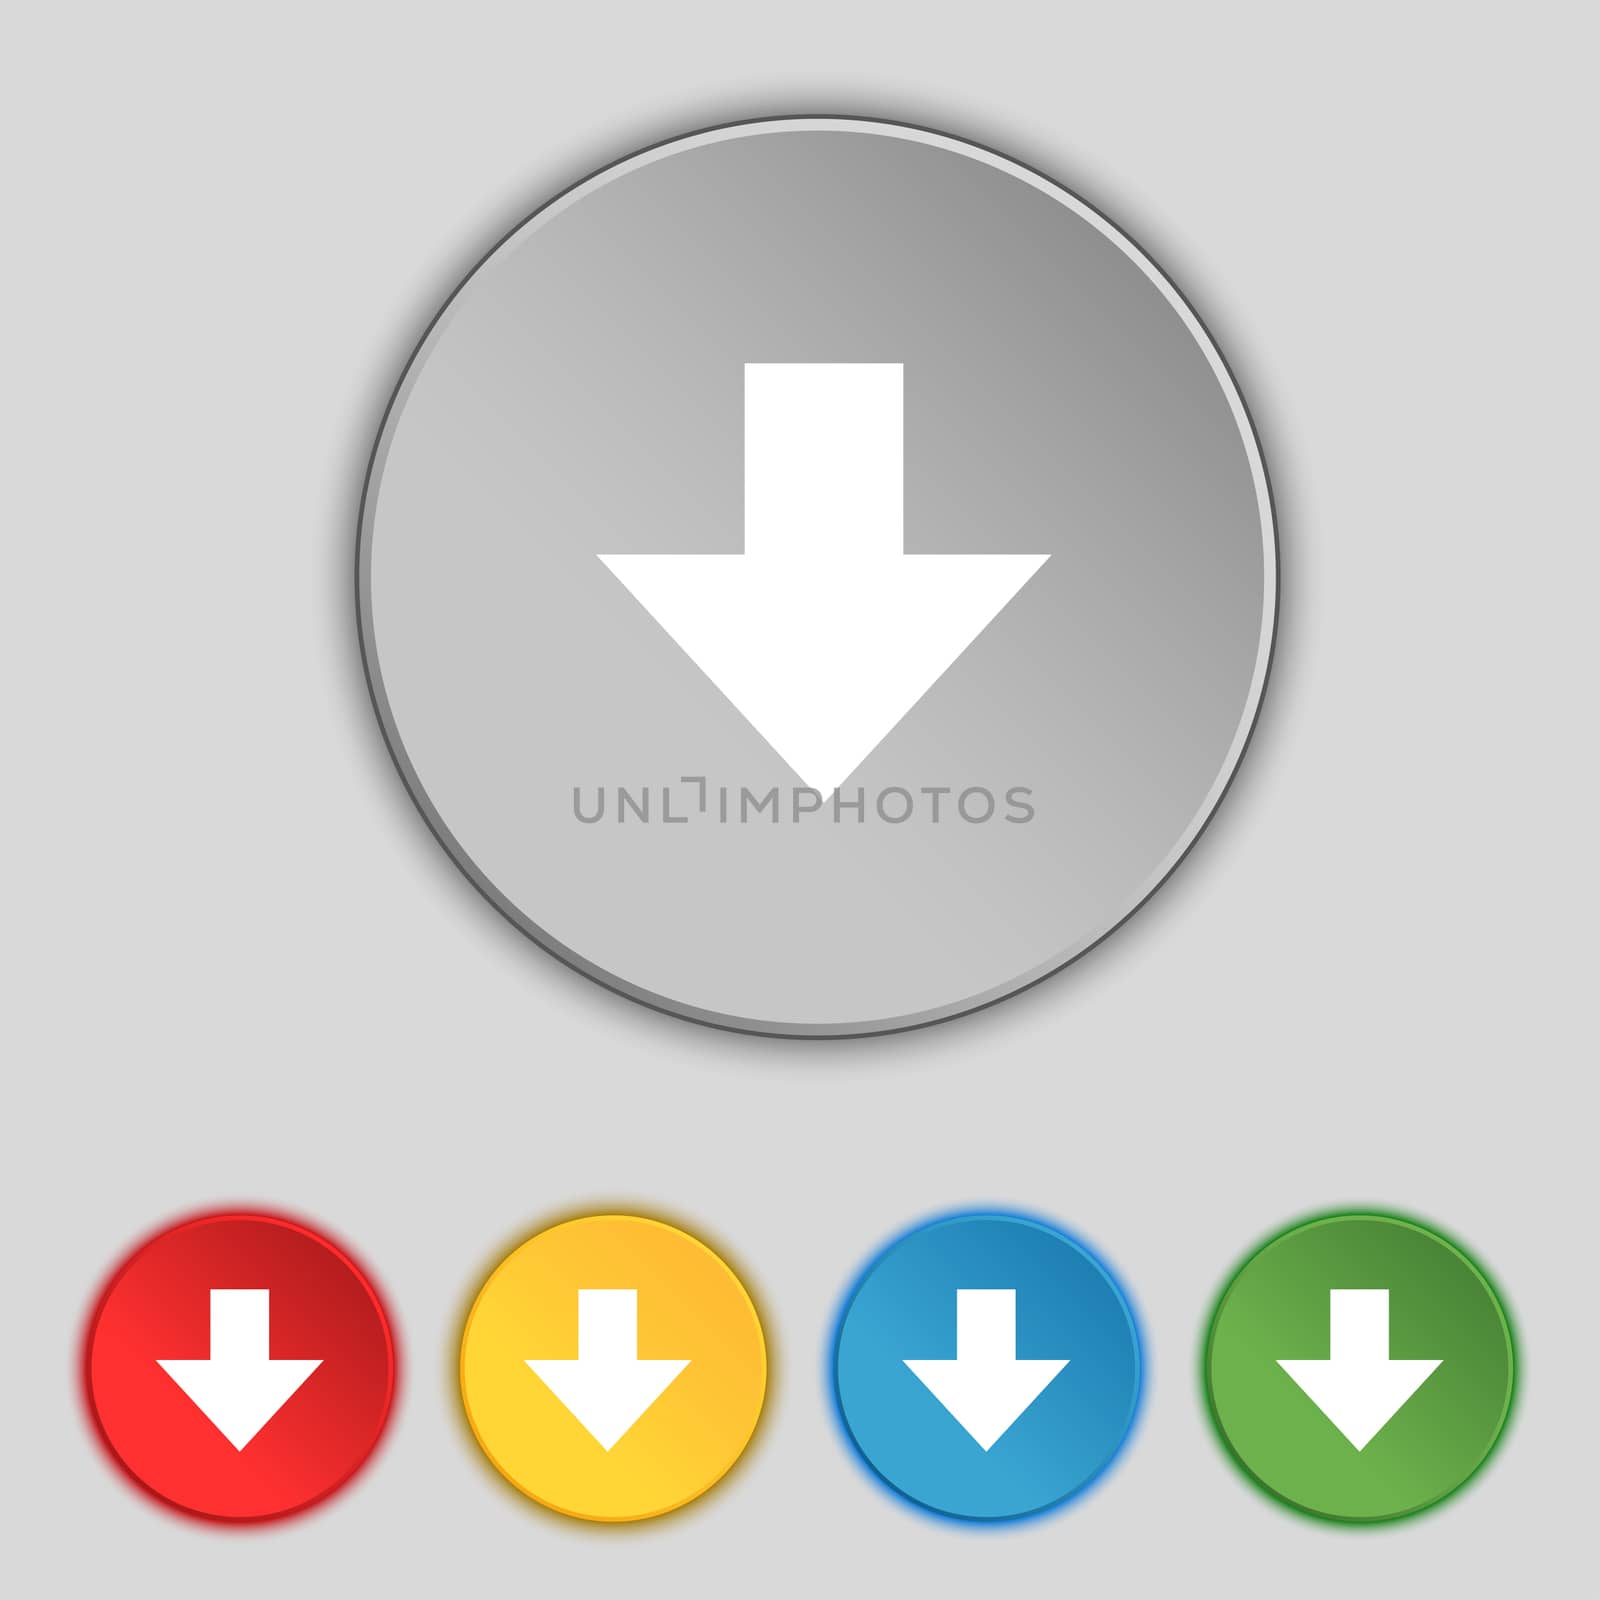 Download sign. Downloading flat icon. Load label. Set colourful buttons illustration